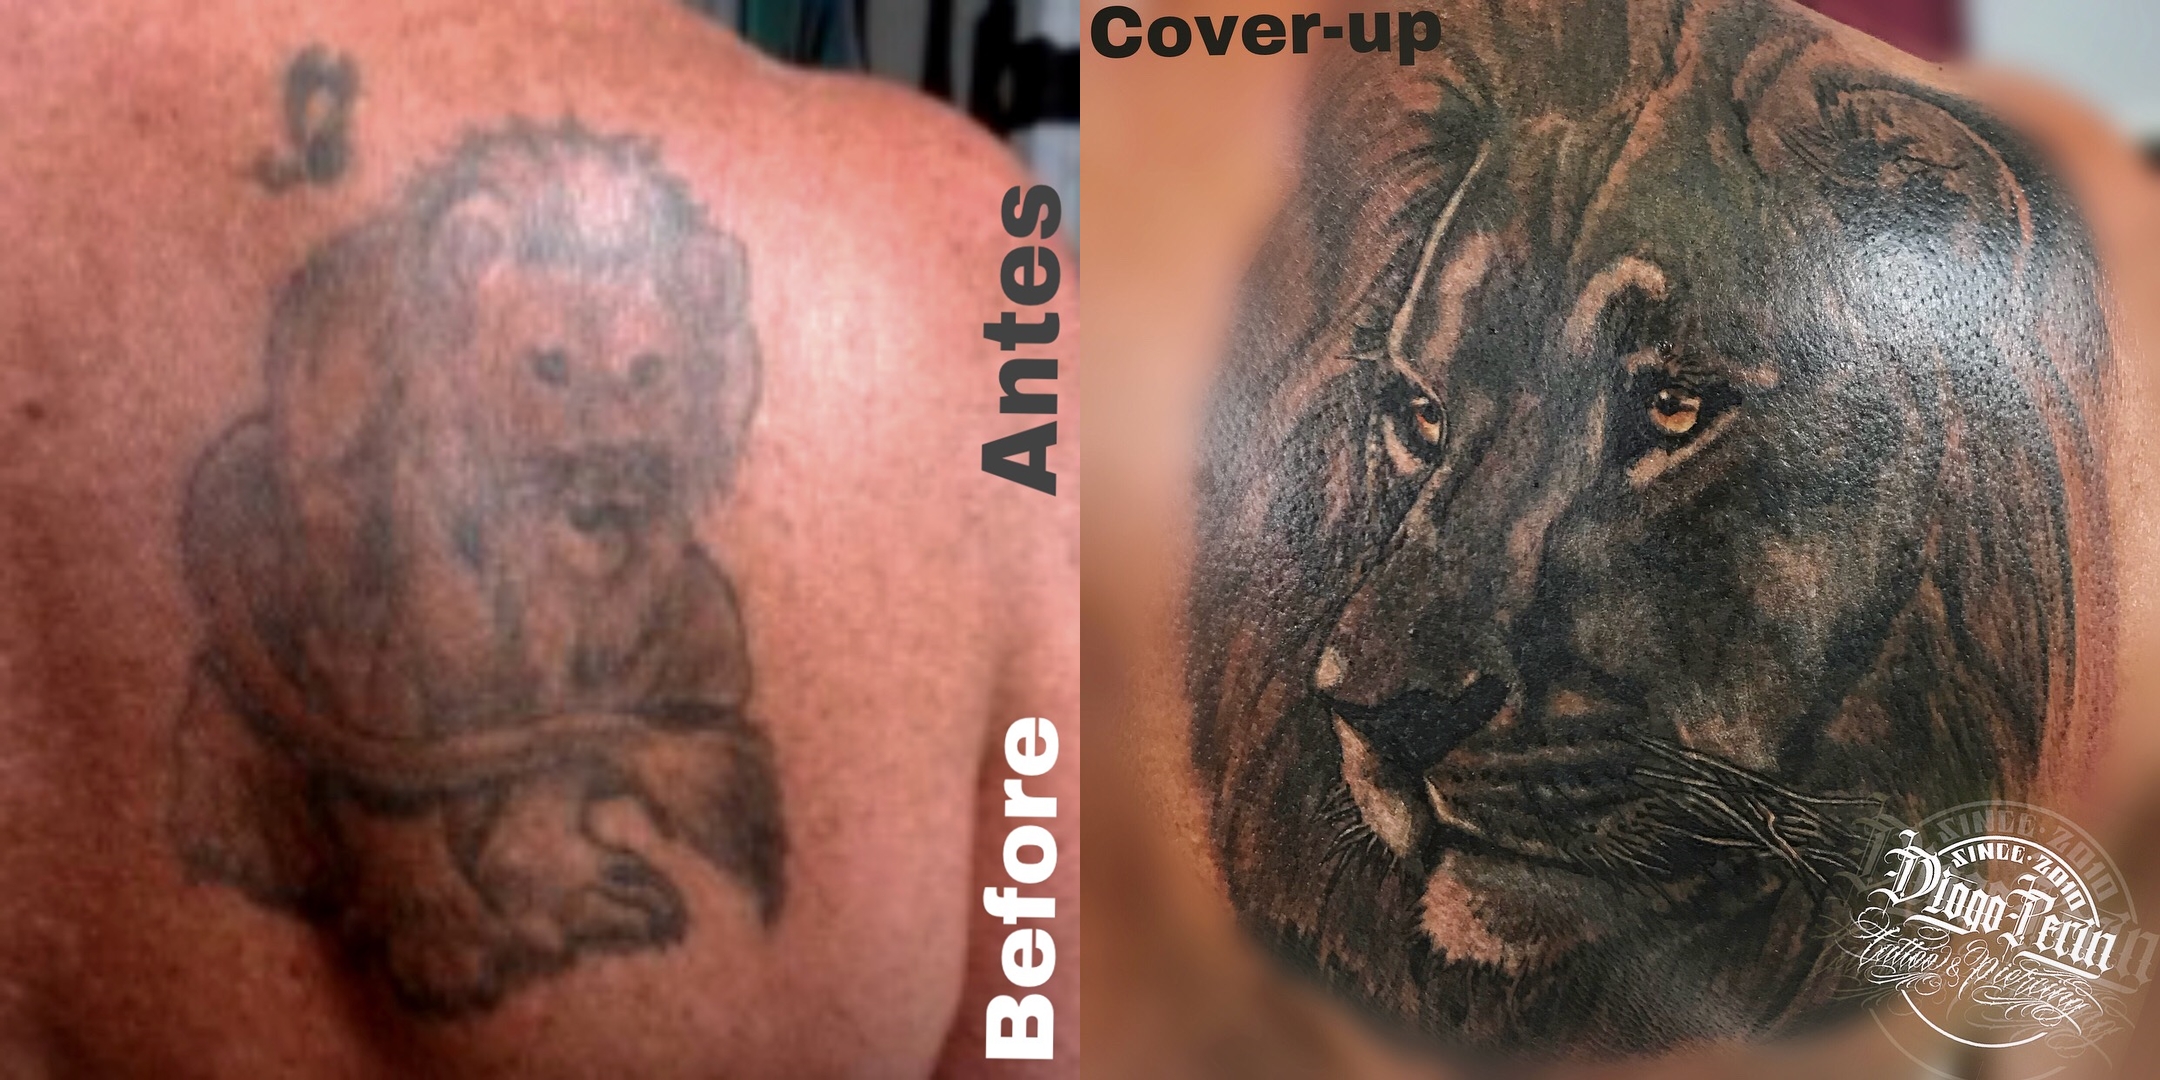 Cover-up - Diogo Tattoo